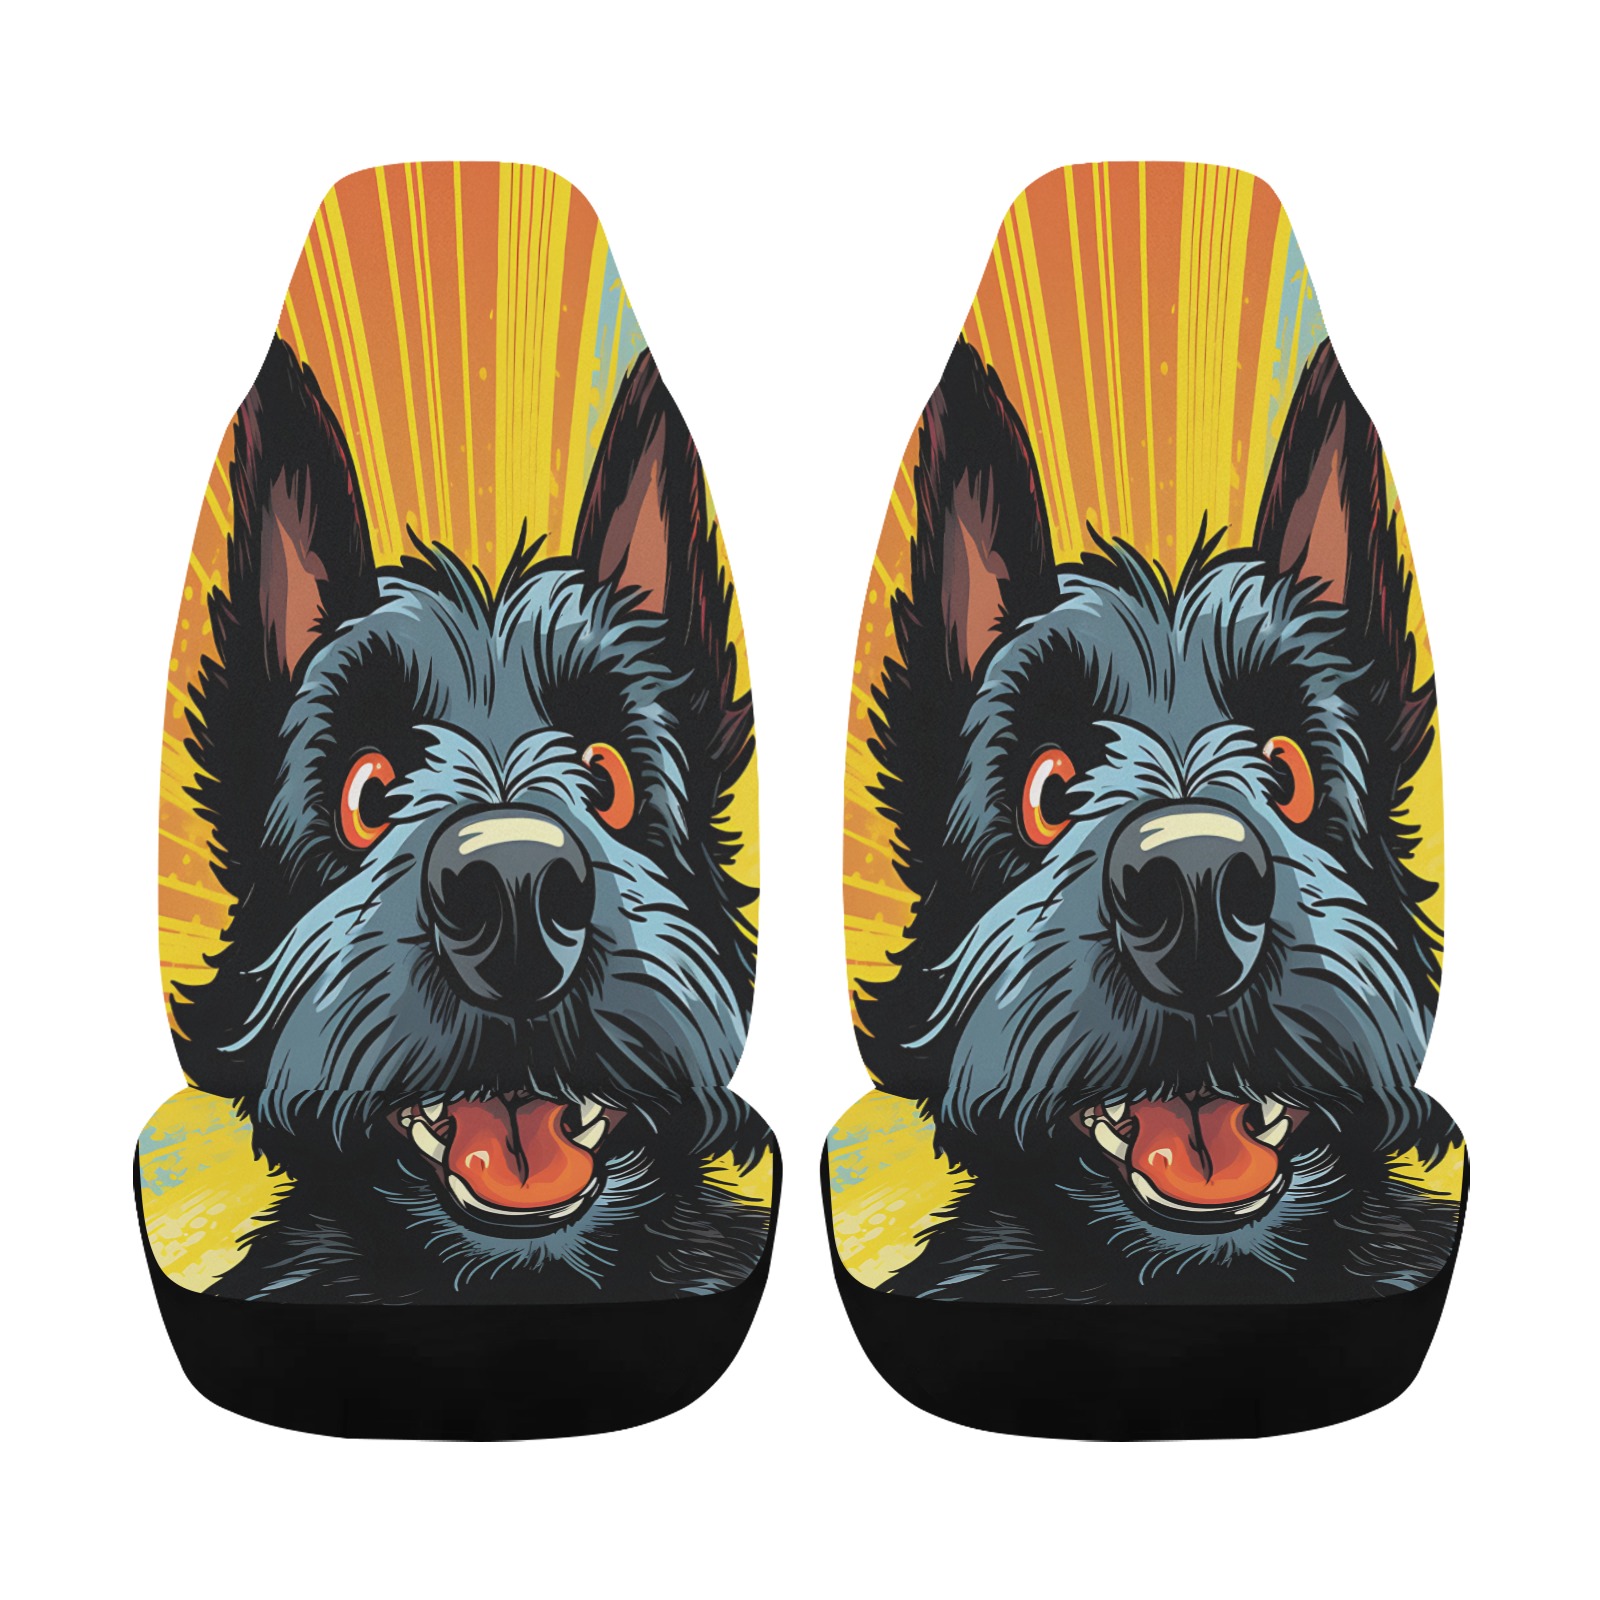 Scottish Terrier Pop Art Car Seat Cover Airbag Compatible (Set of 2)